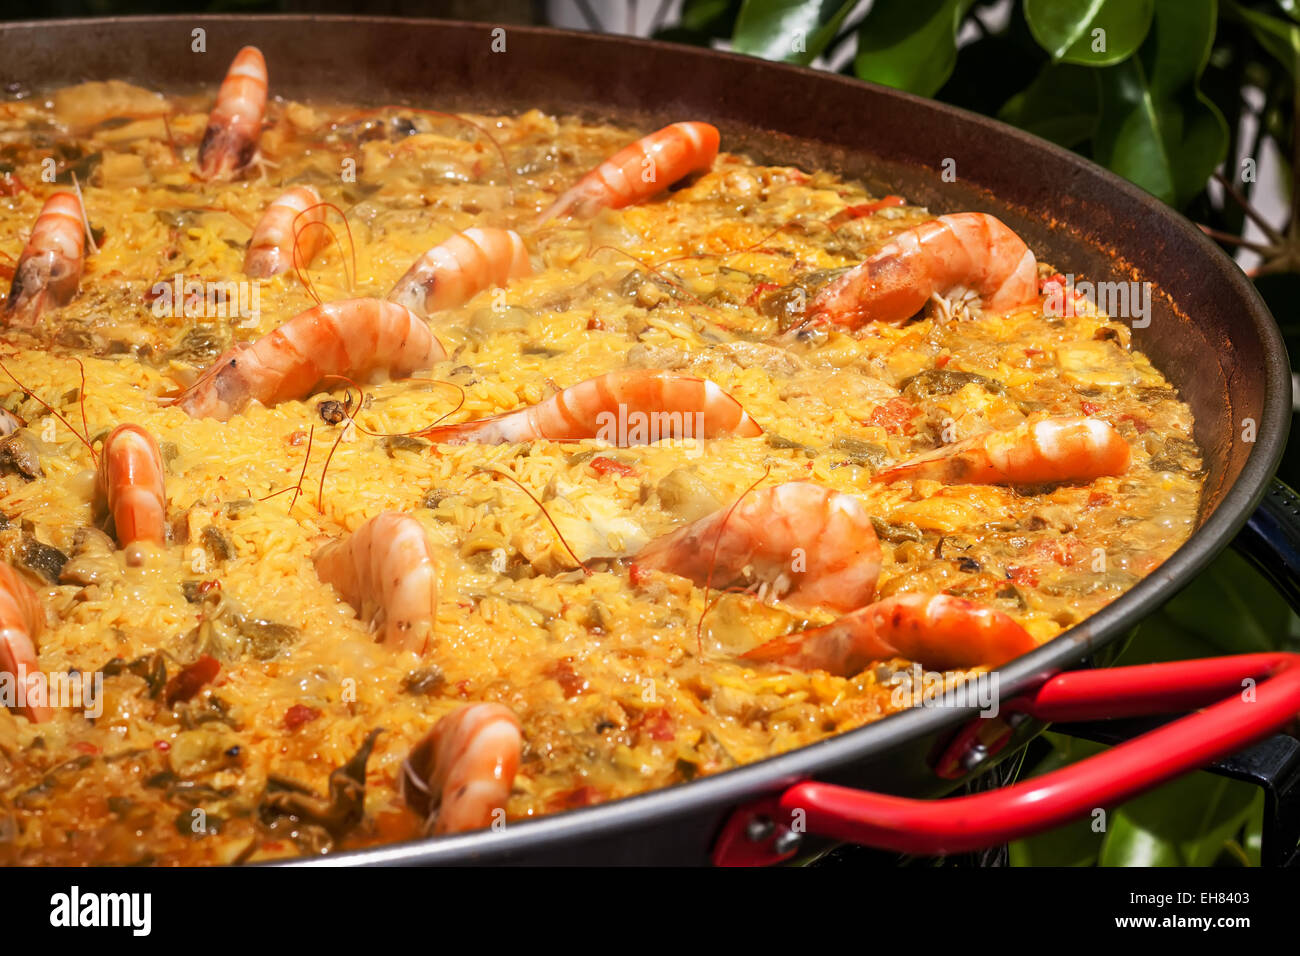 spanish rice with vegetables and shirmp also called paella Stock Photo